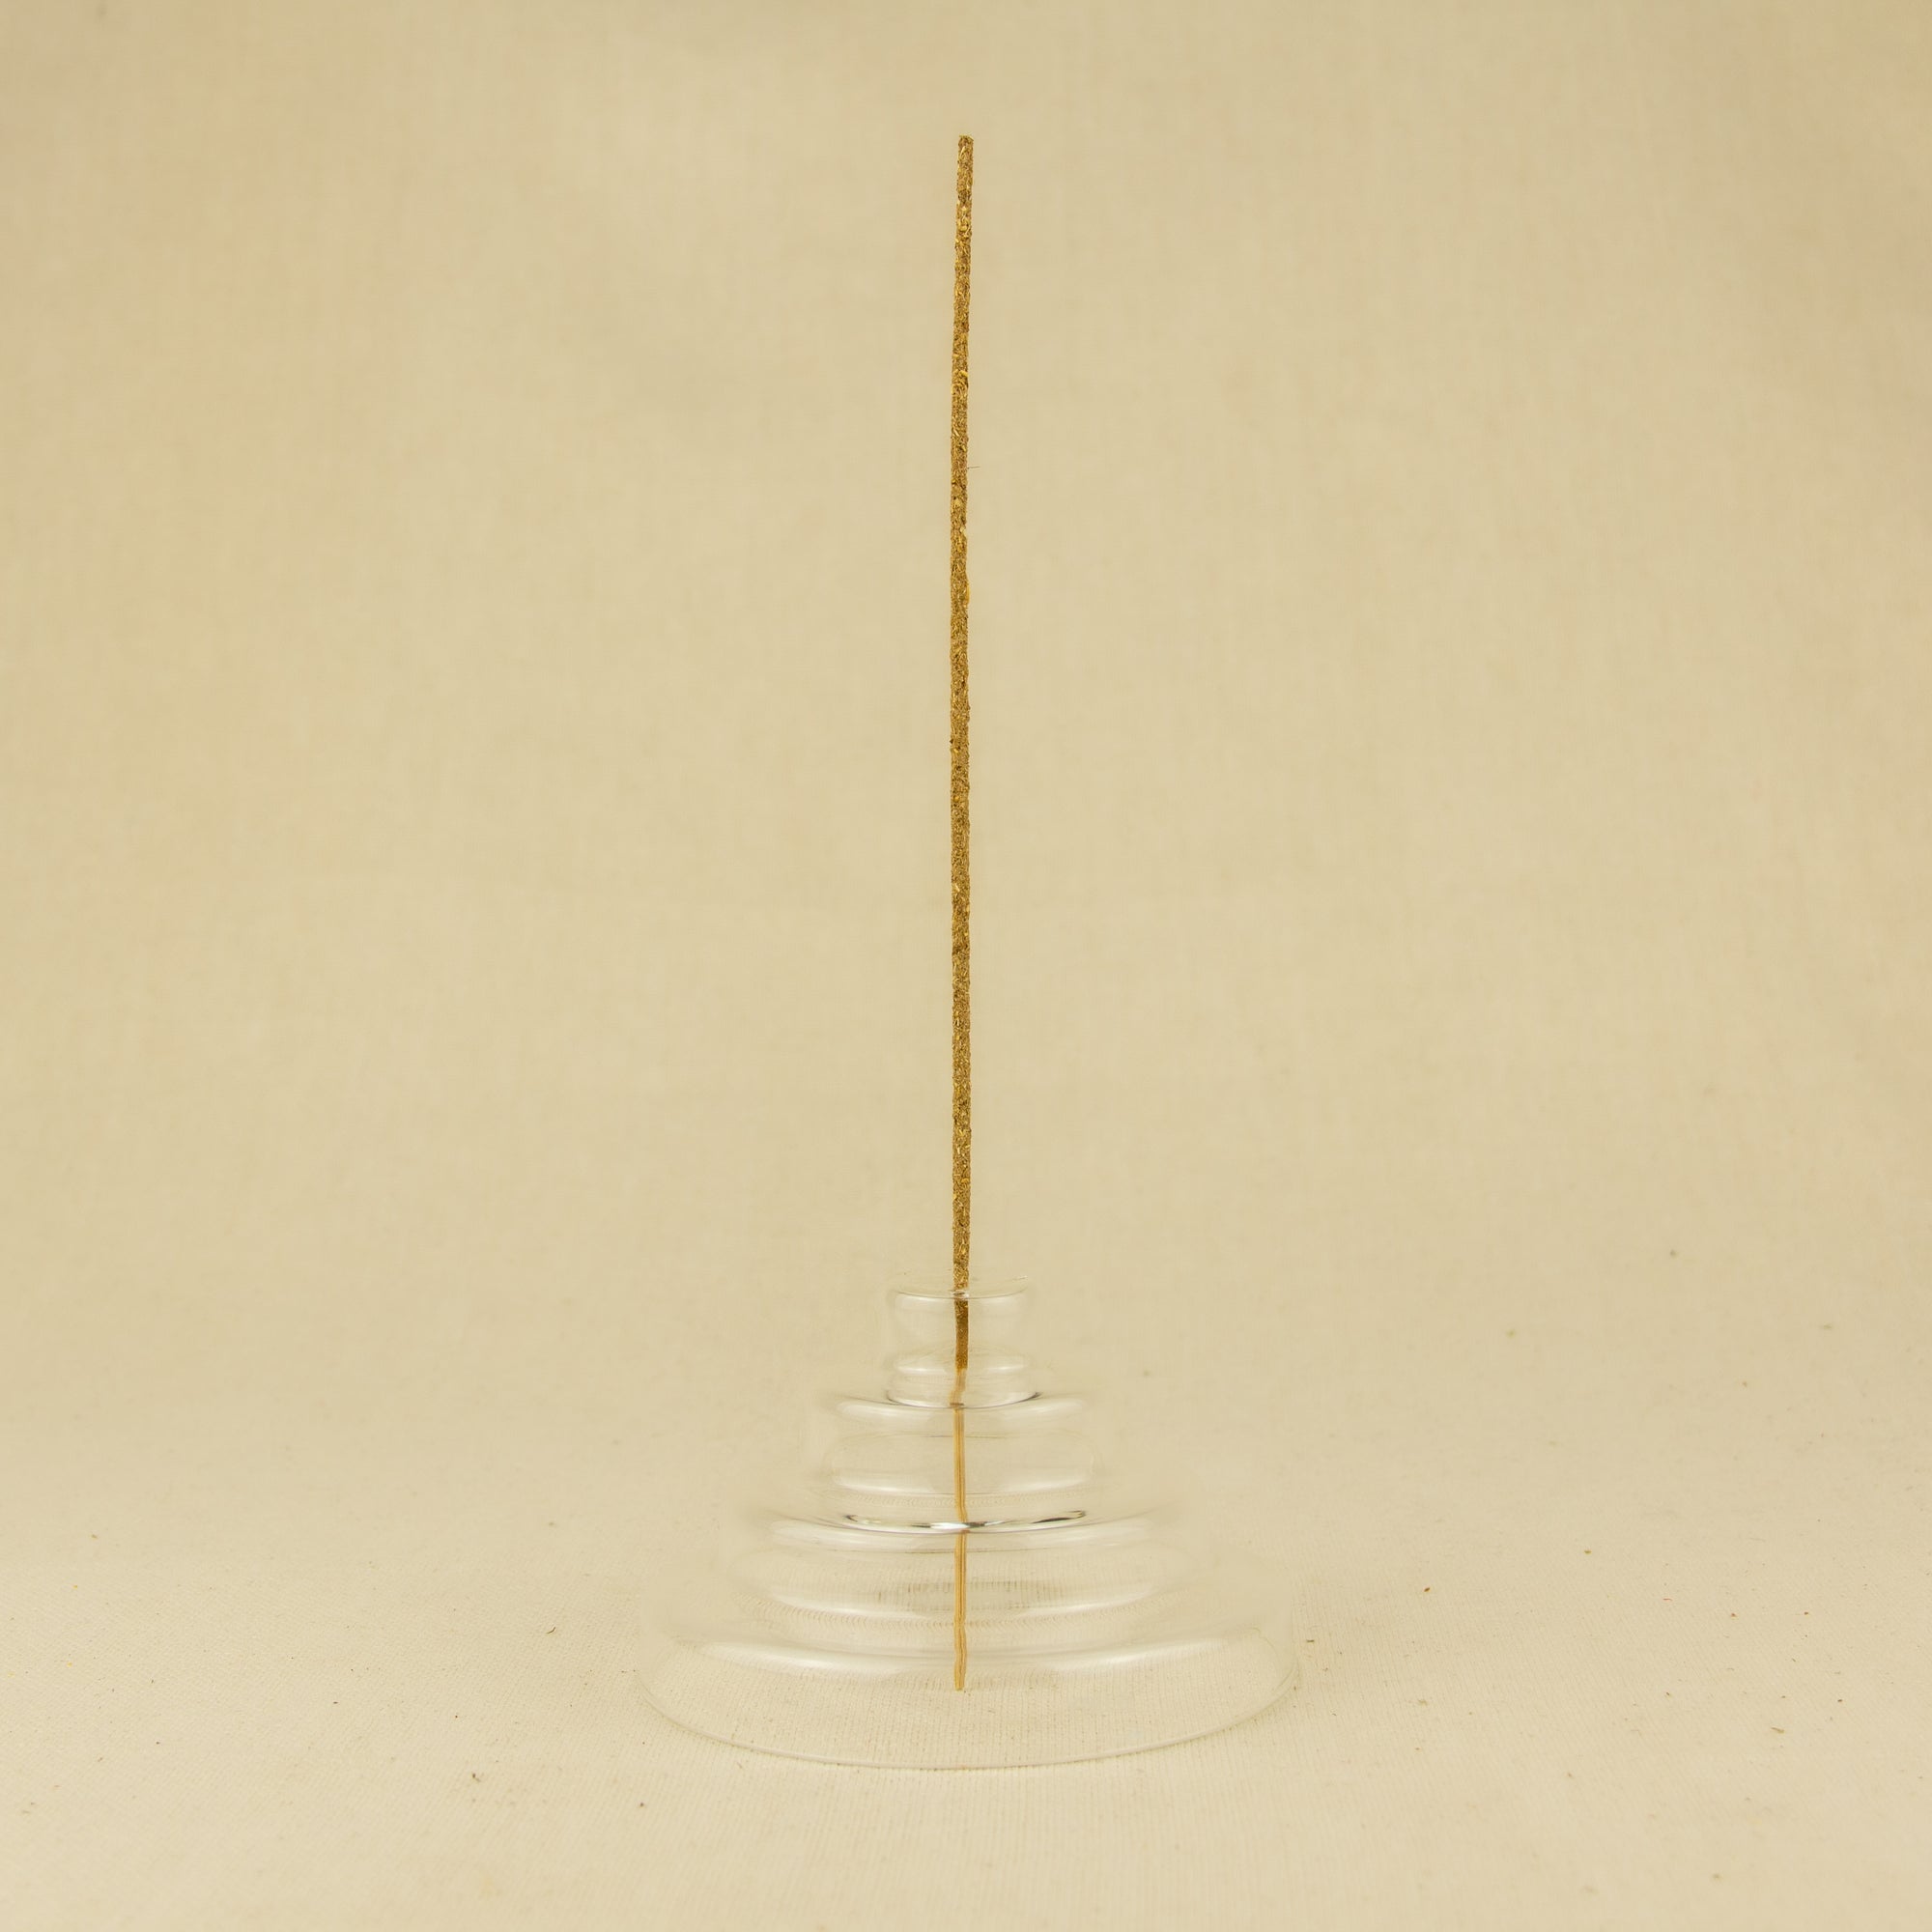 Yield Designs Meso Incense Holder - Clear